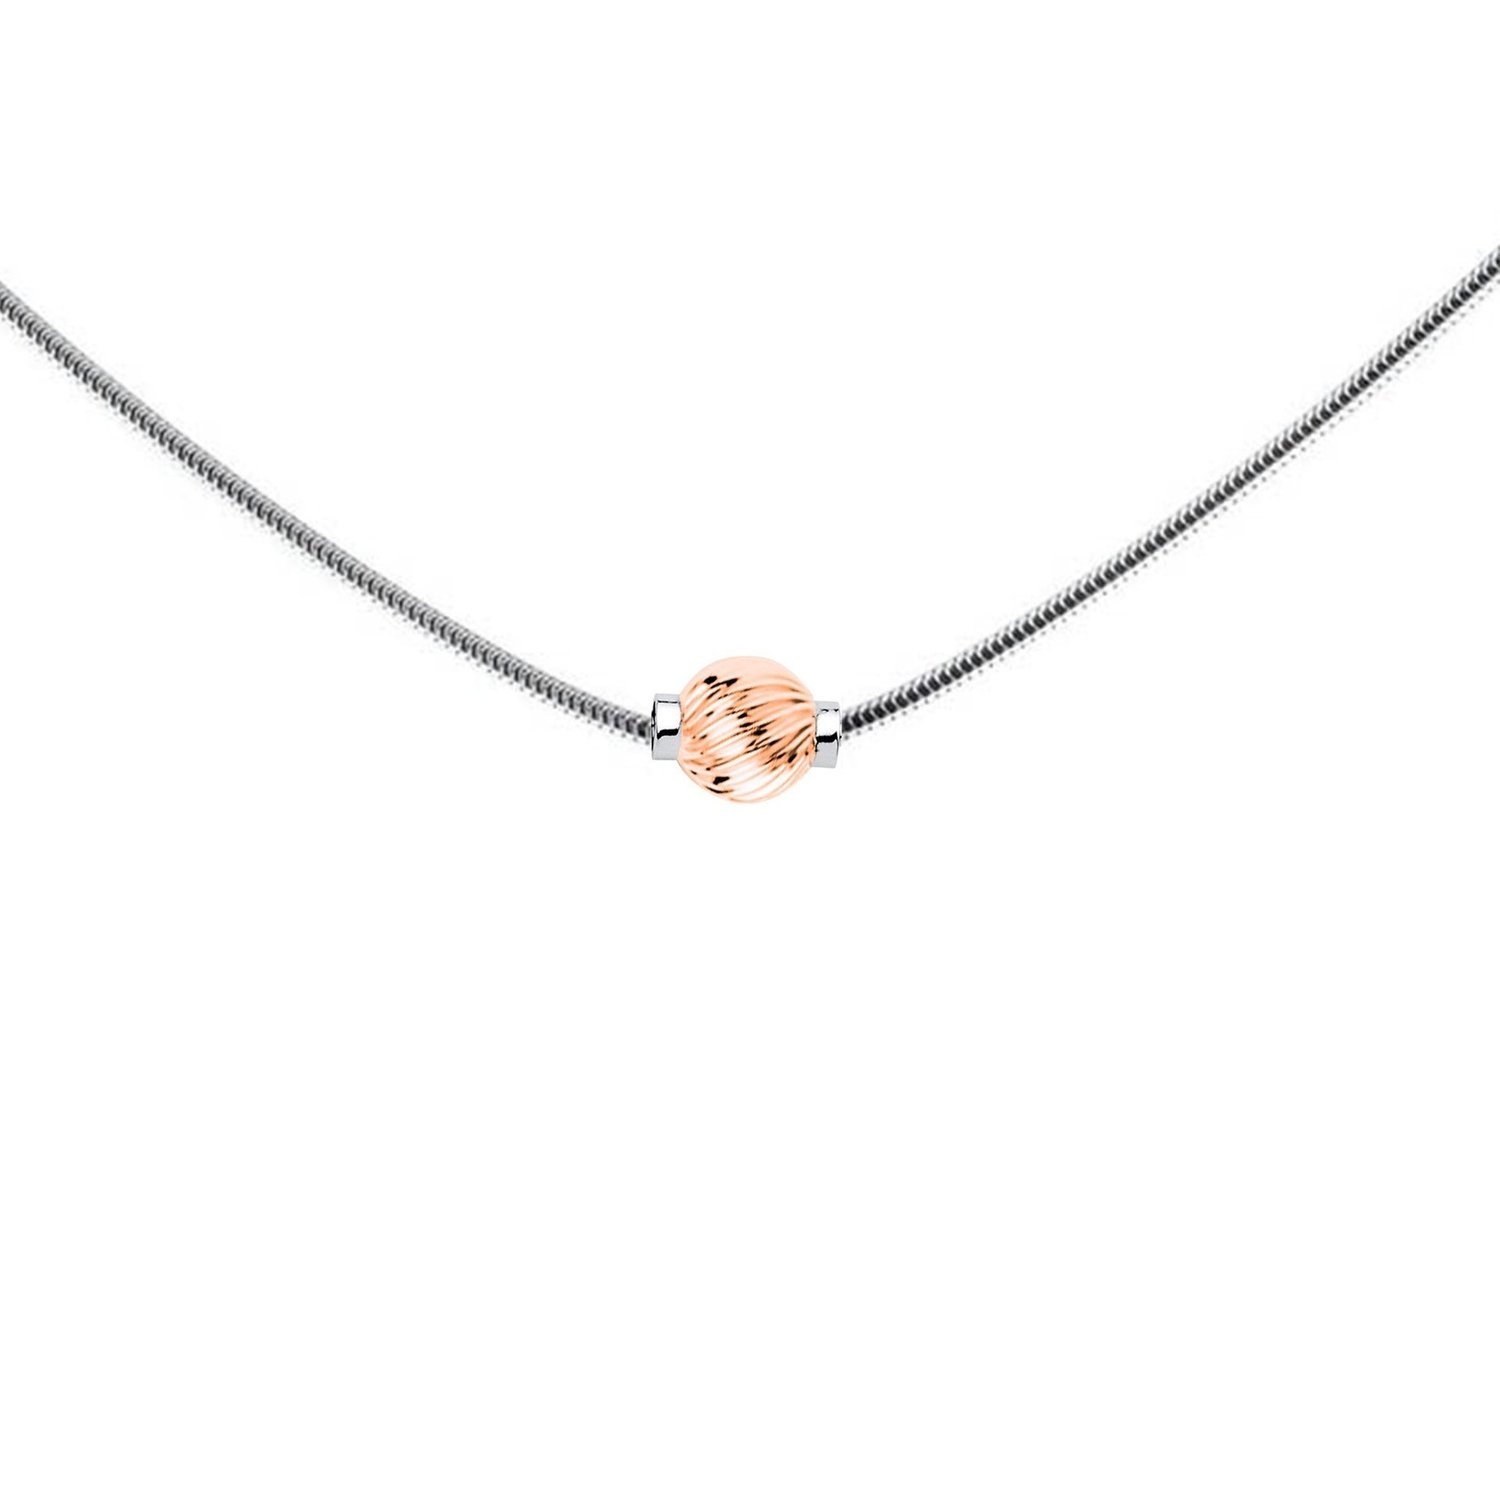 SS and Rose Gold Cape Cod Swirl Necklace